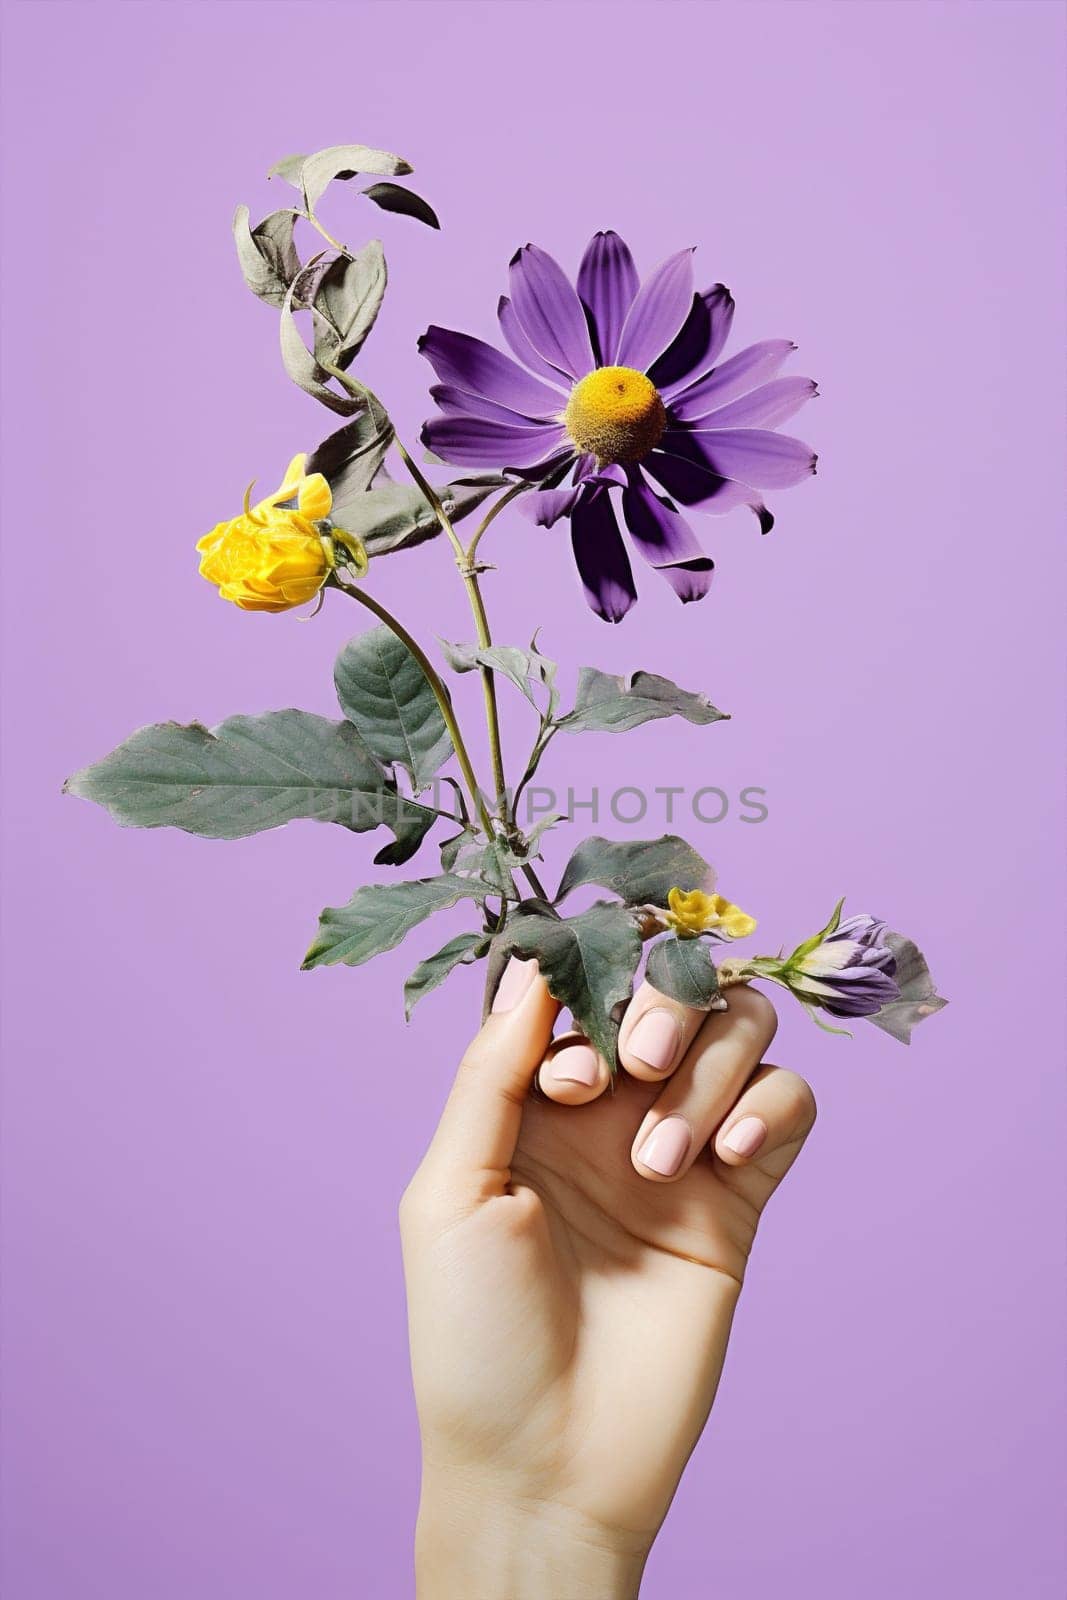 Woman poster bloom hands floral background green nature beauty vintage bouquet violet fresh blossom holding flowers petal spring white